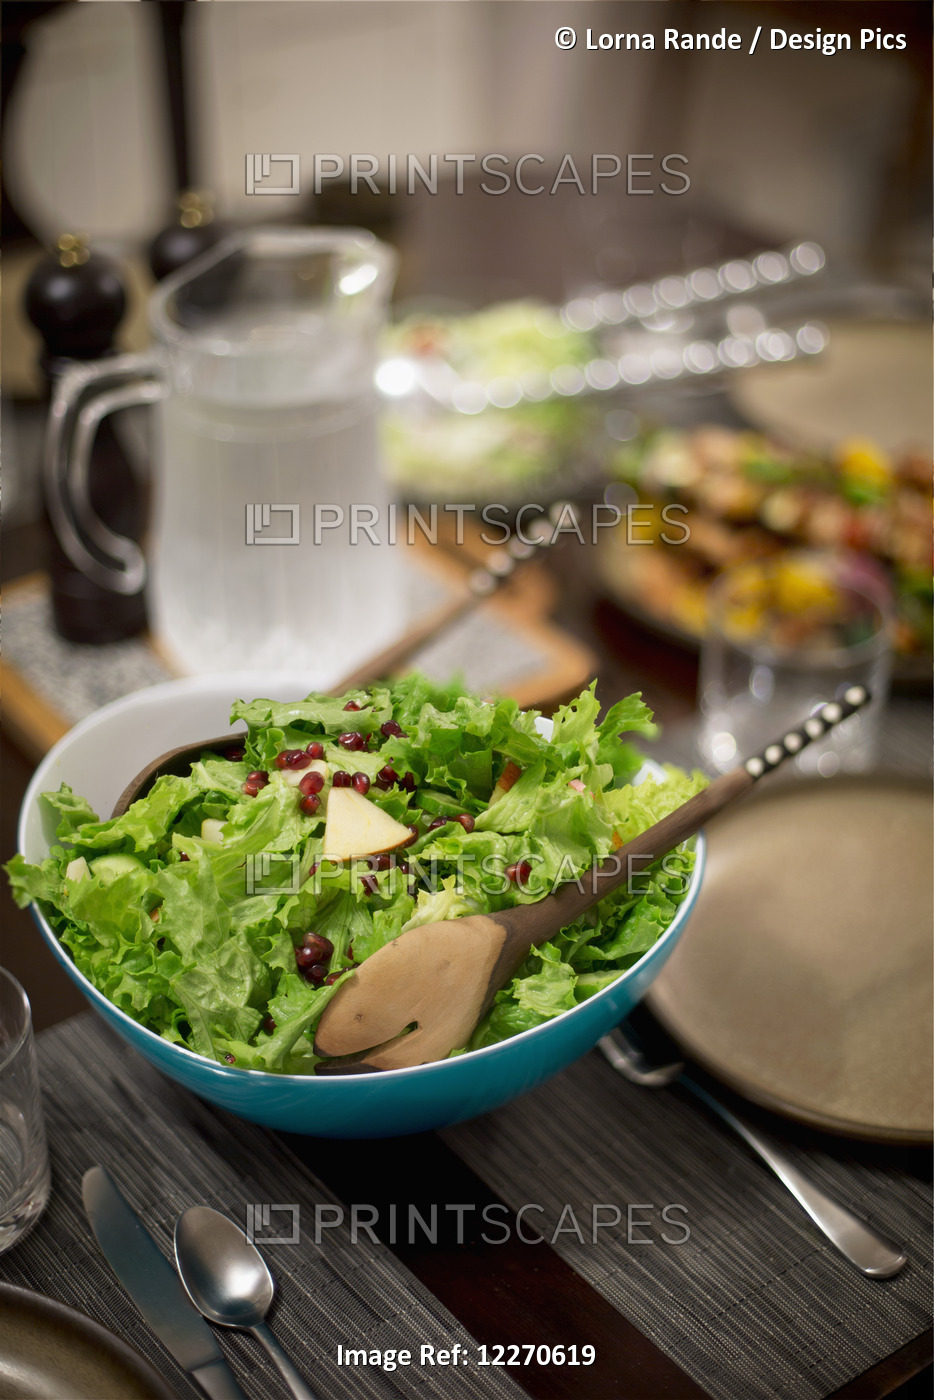 Salad On A Table Set For Dinnertime; Vancouver, British Columbia, Canada